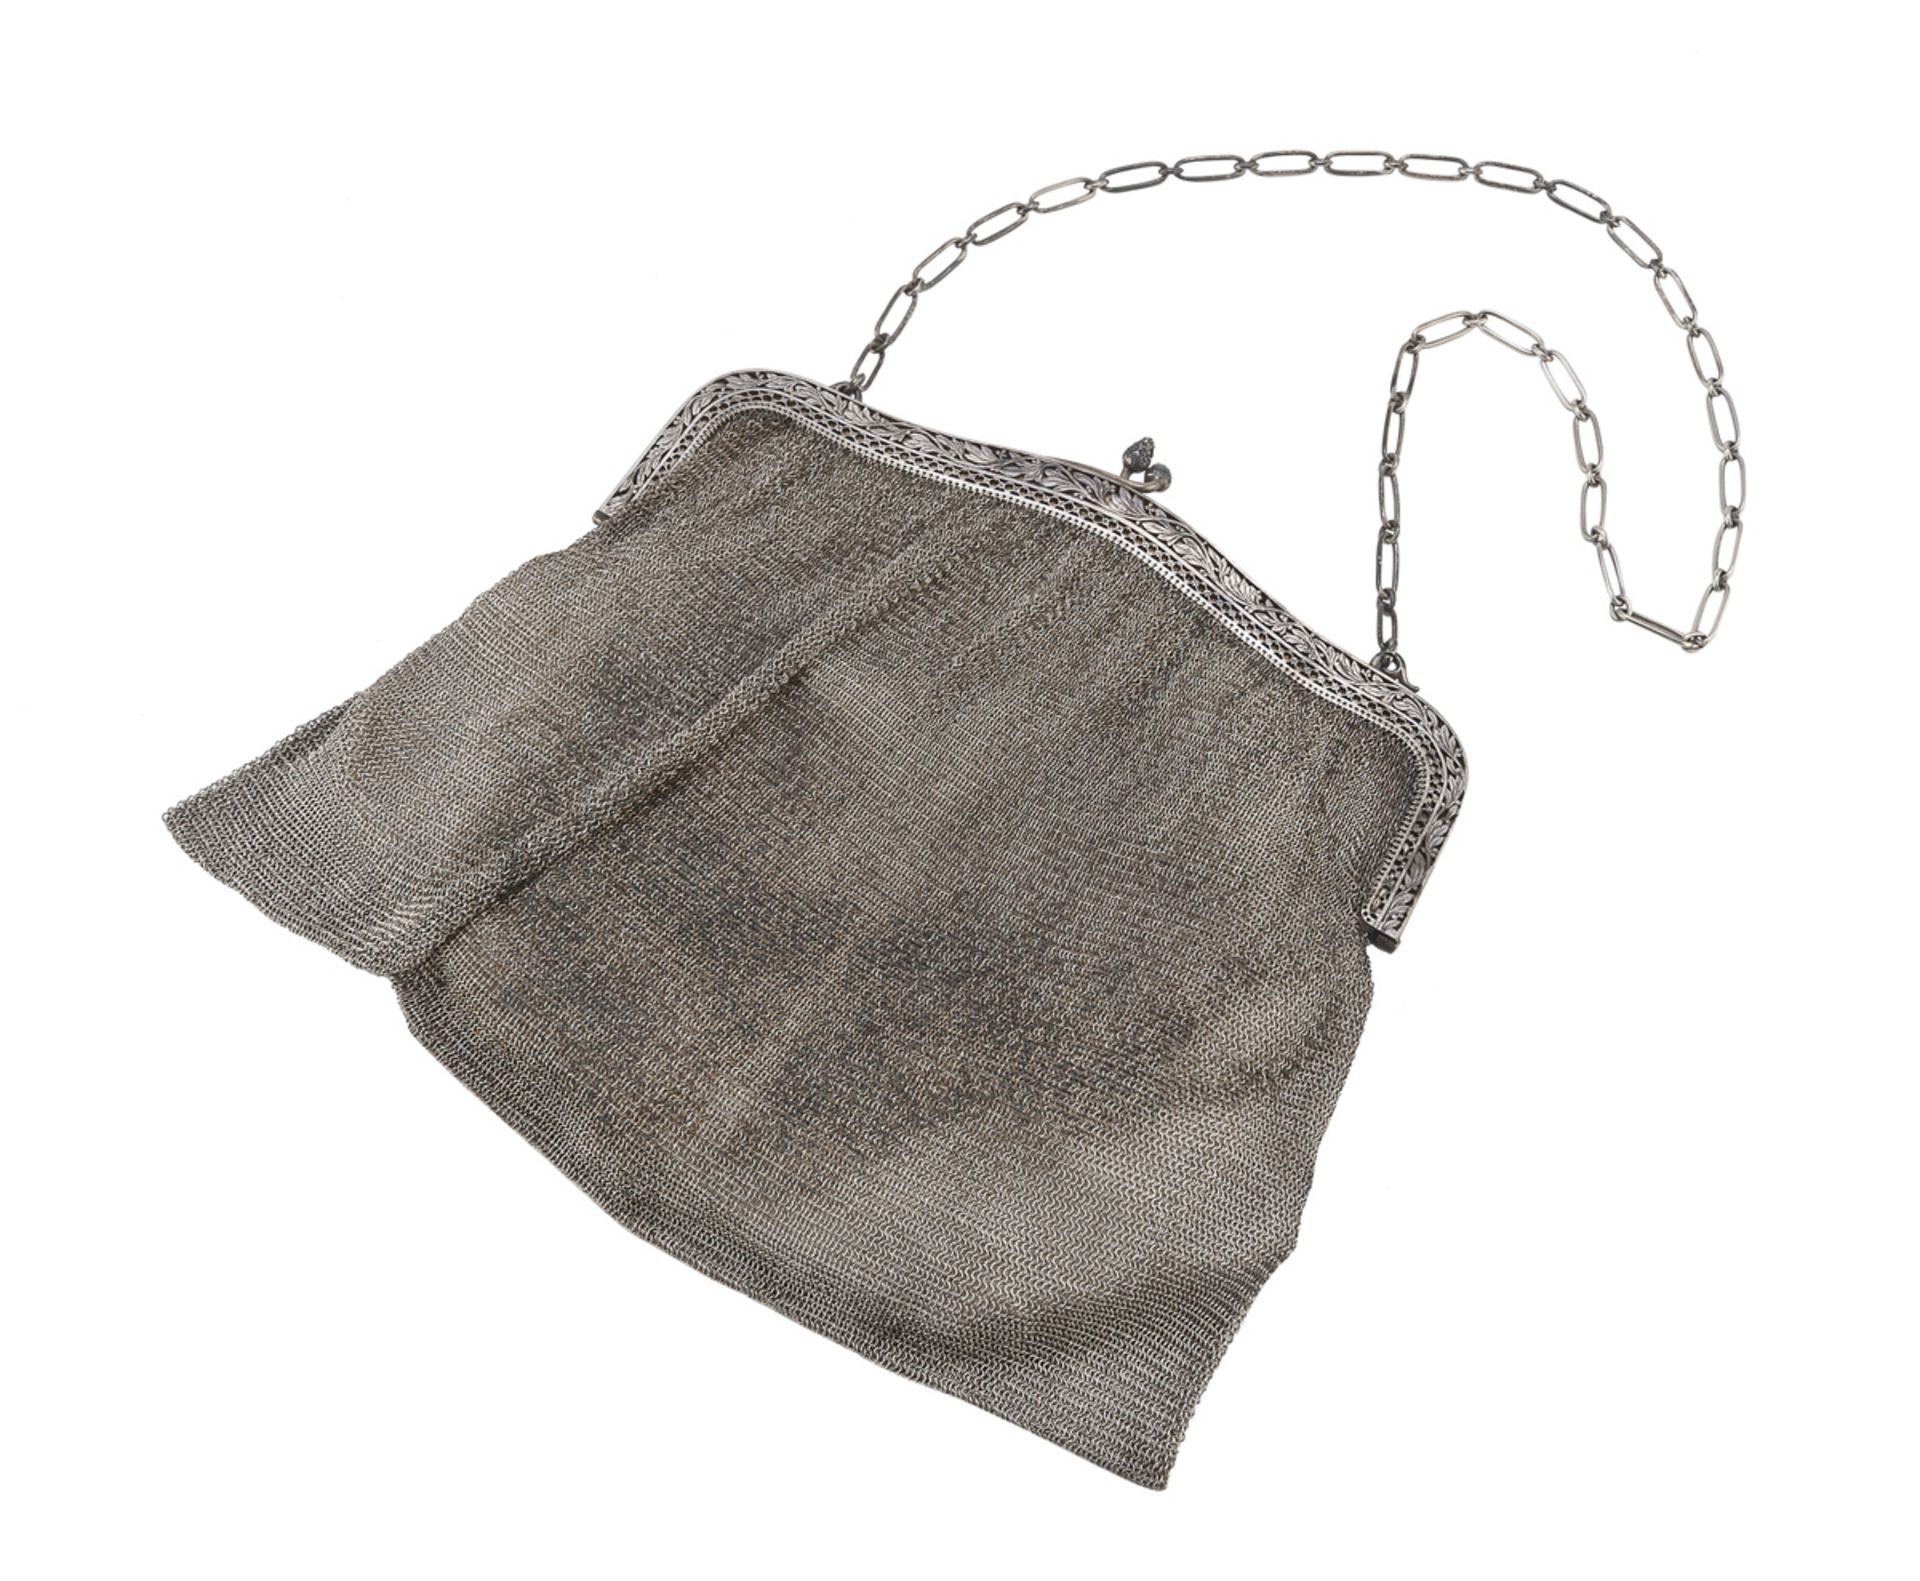 SILVER BAG EARLY 20TH CENTURY